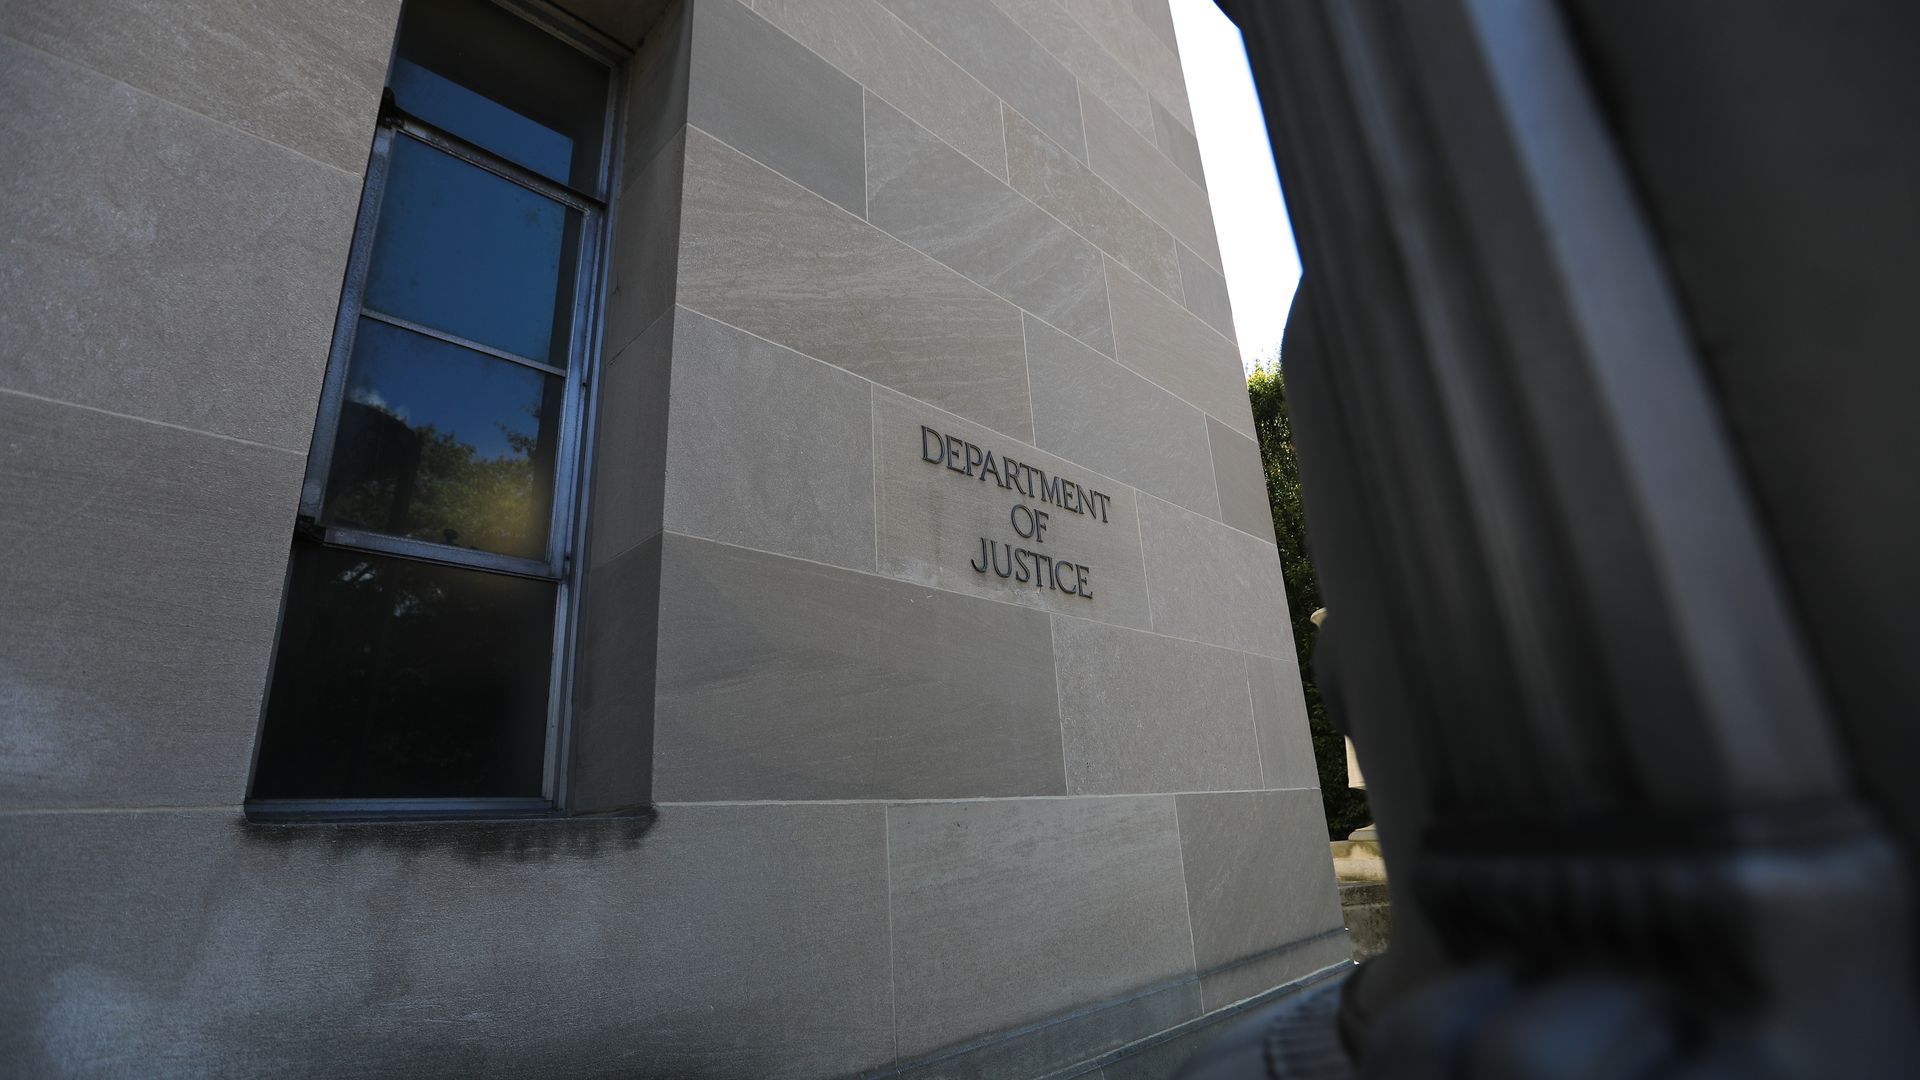 Photo of the U.S. Department of Justice building, with "Department of Justice" inscribed on the outer wall